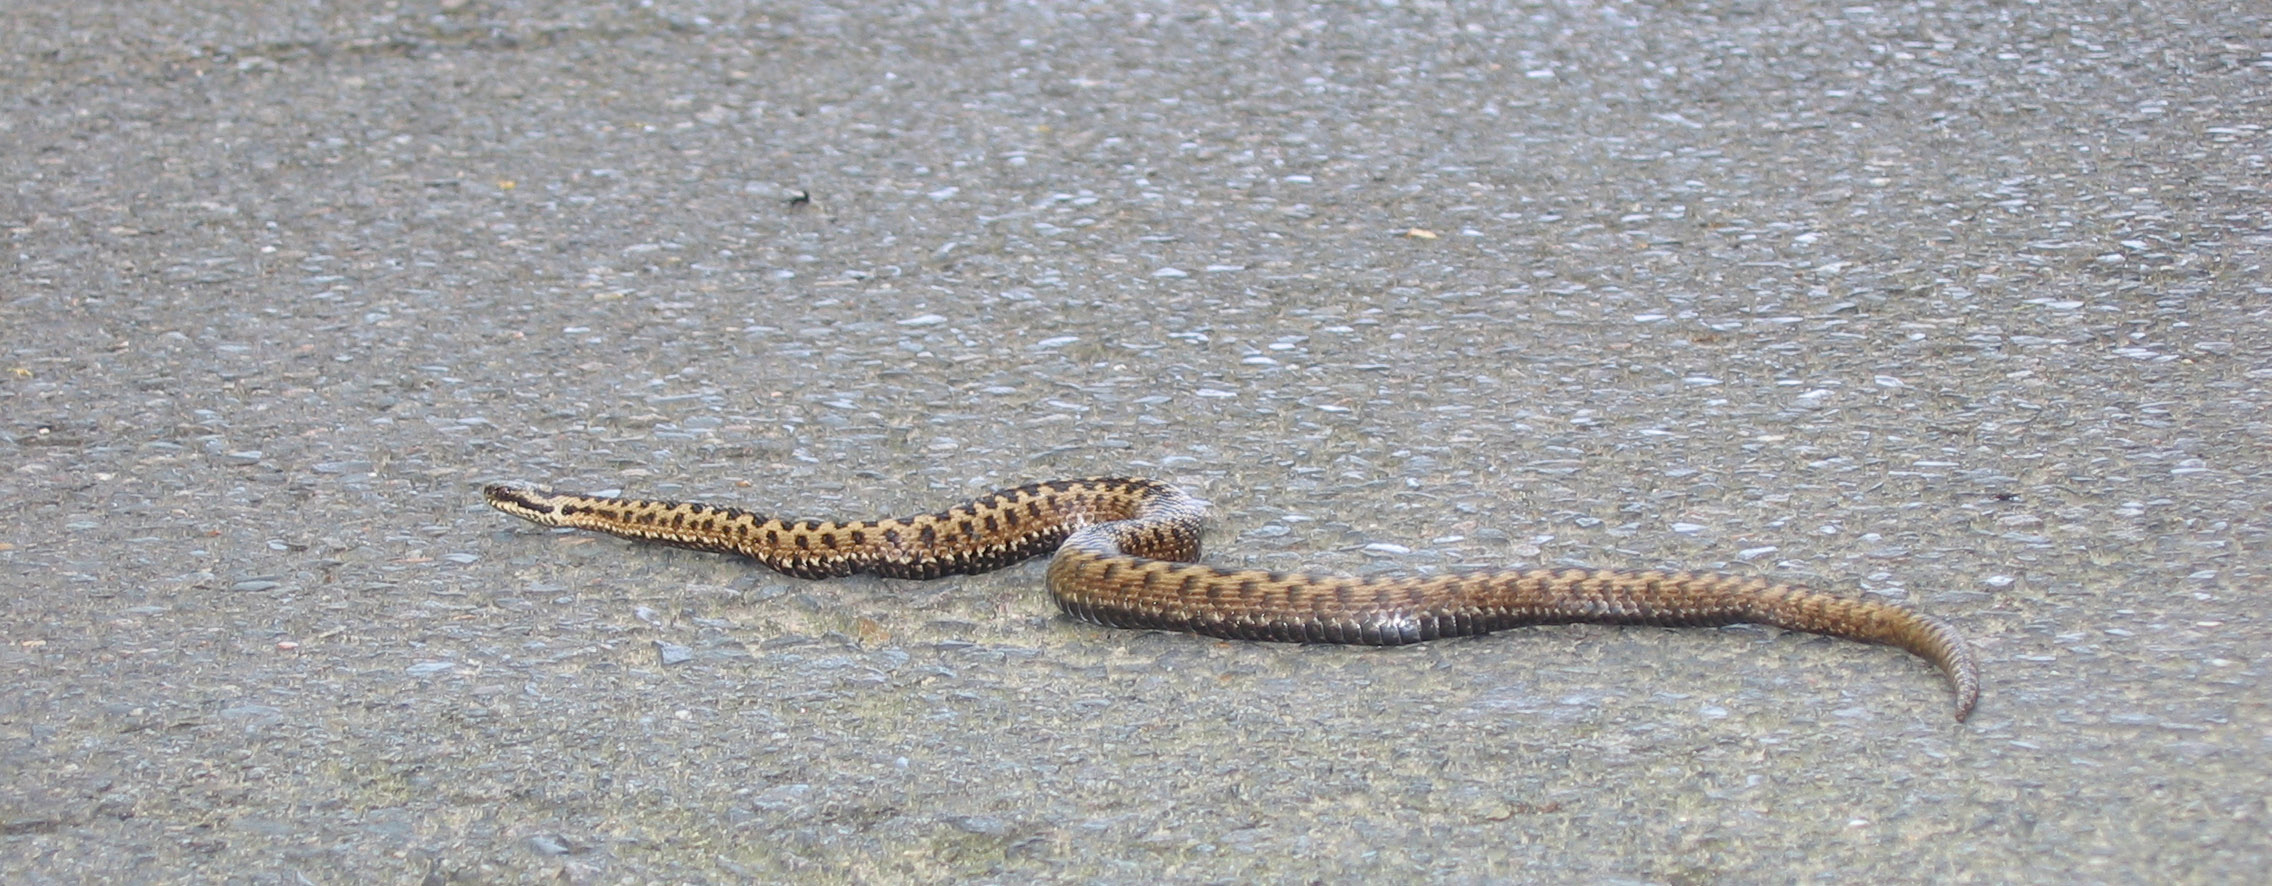 two snakes on asphalt with a water drop coming out